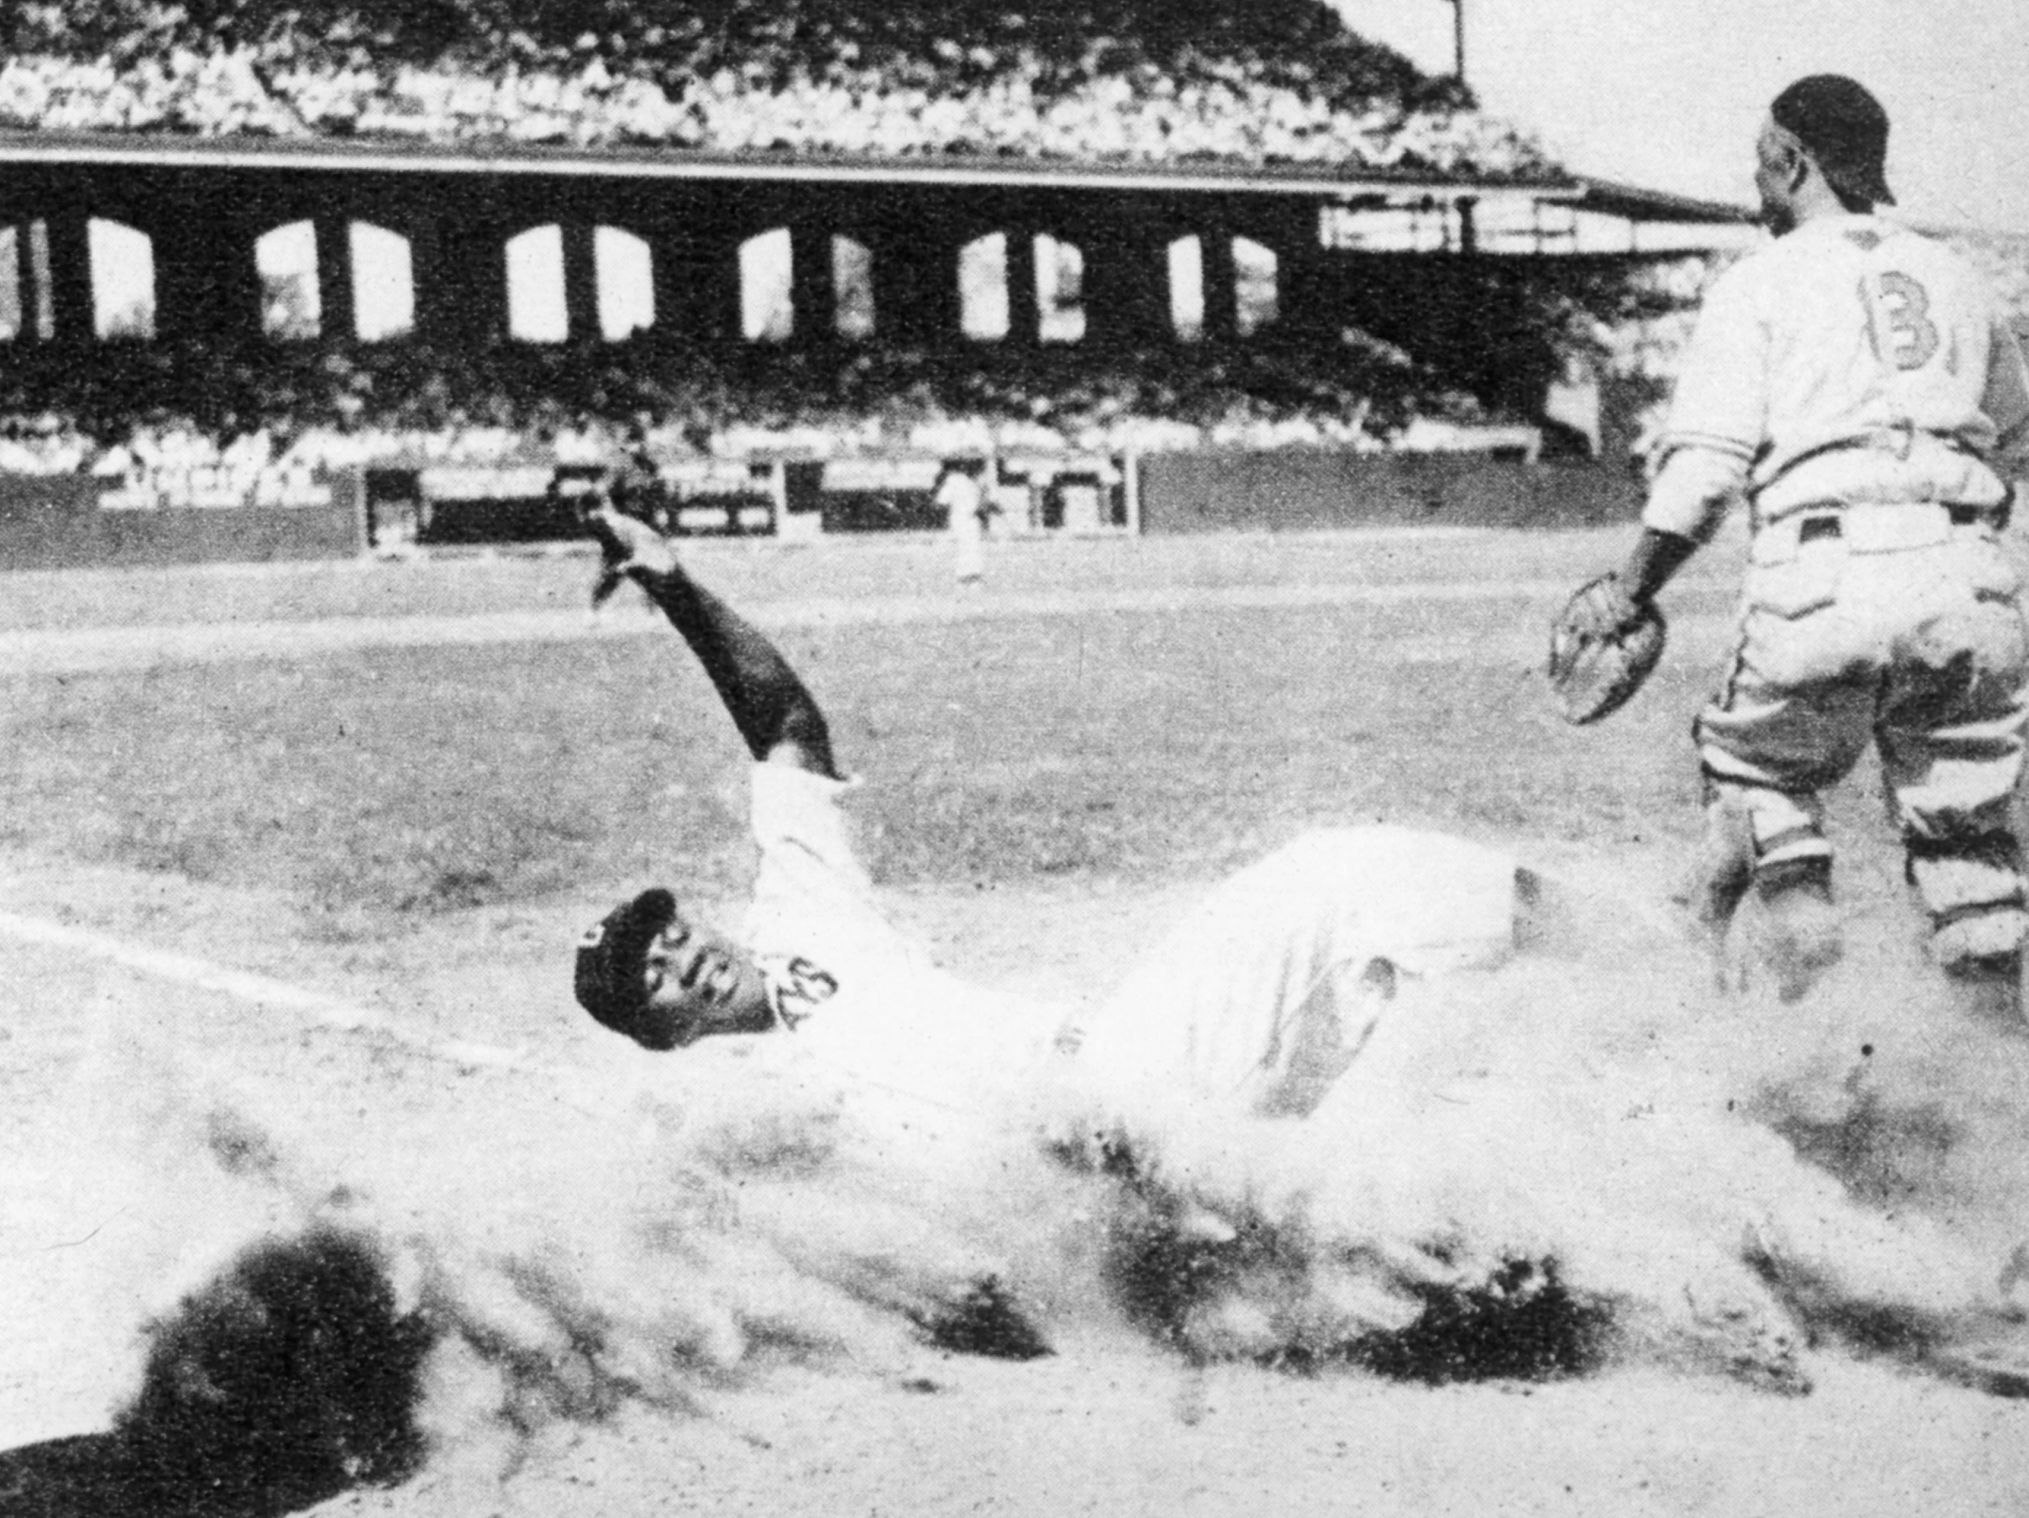 josh gibson slides into home plate in nineteen fourty four.